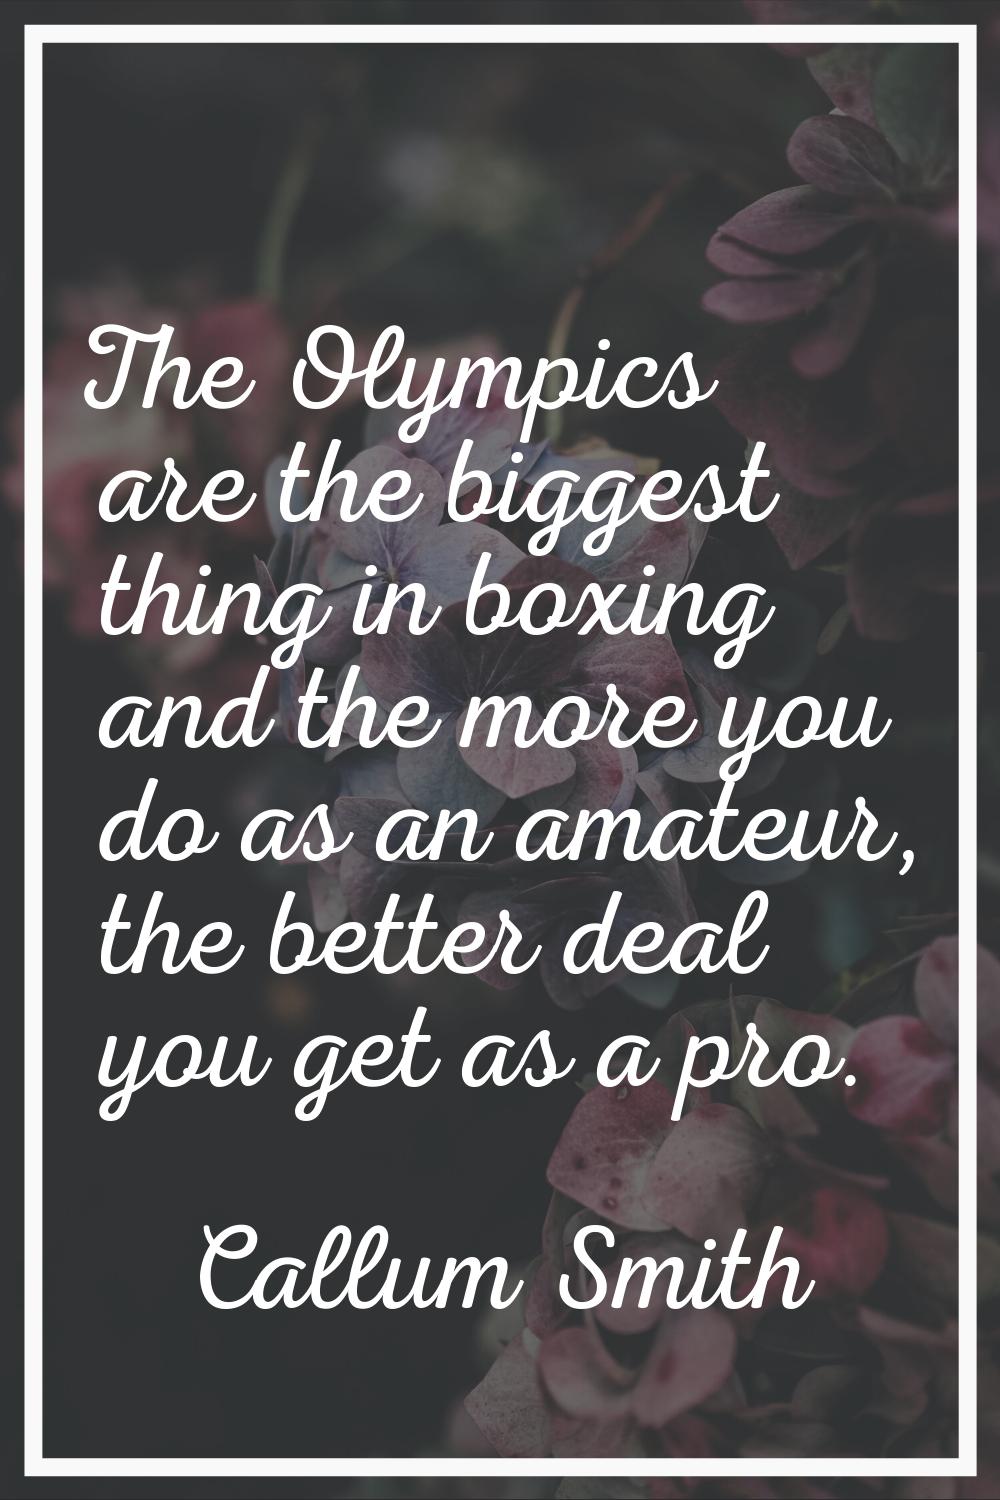 The Olympics are the biggest thing in boxing and the more you do as an amateur, the better deal you